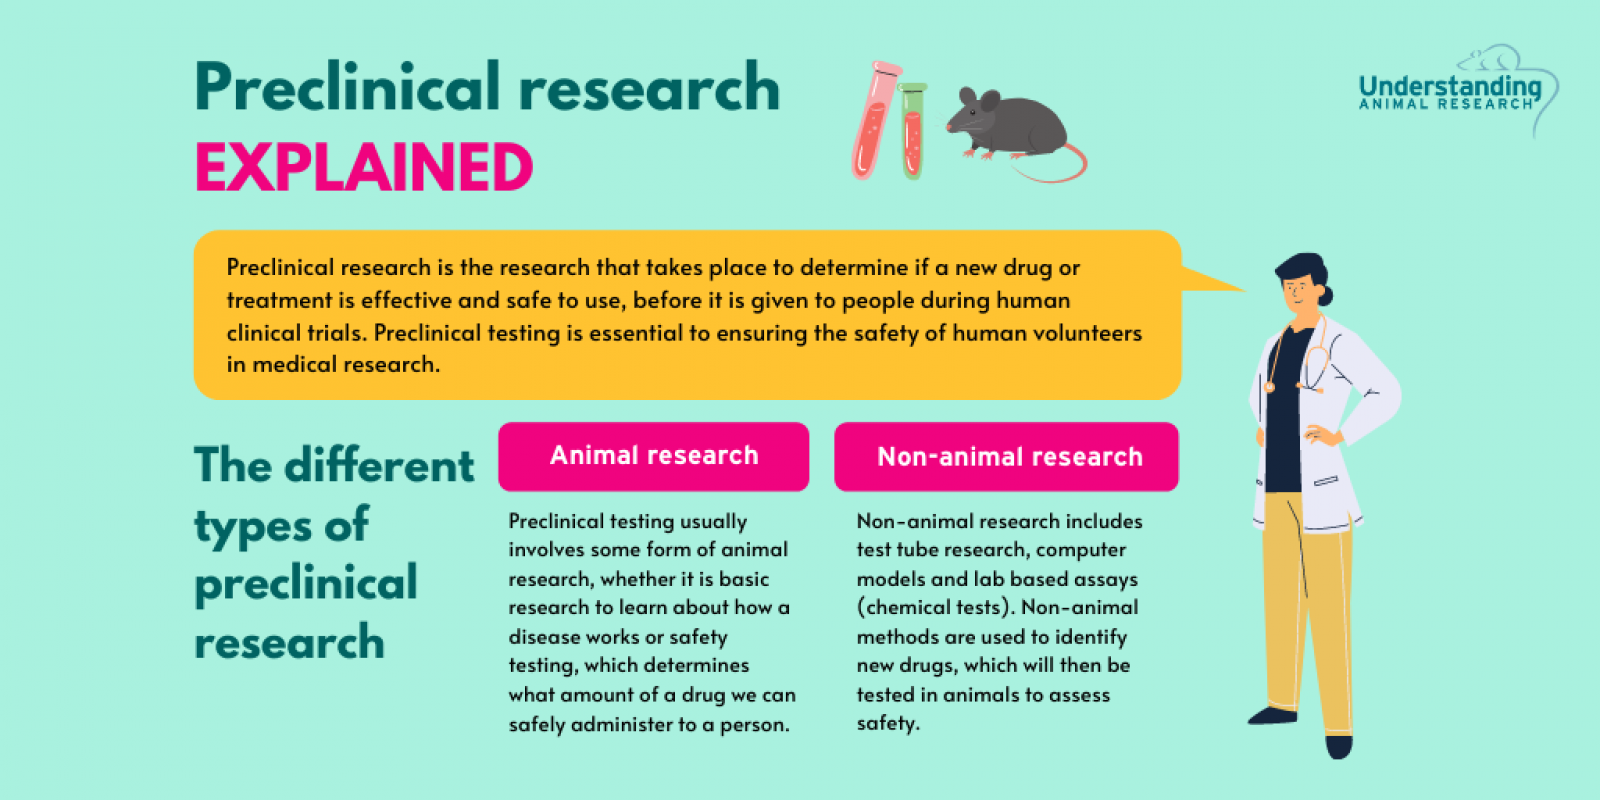 Preclinical research explained